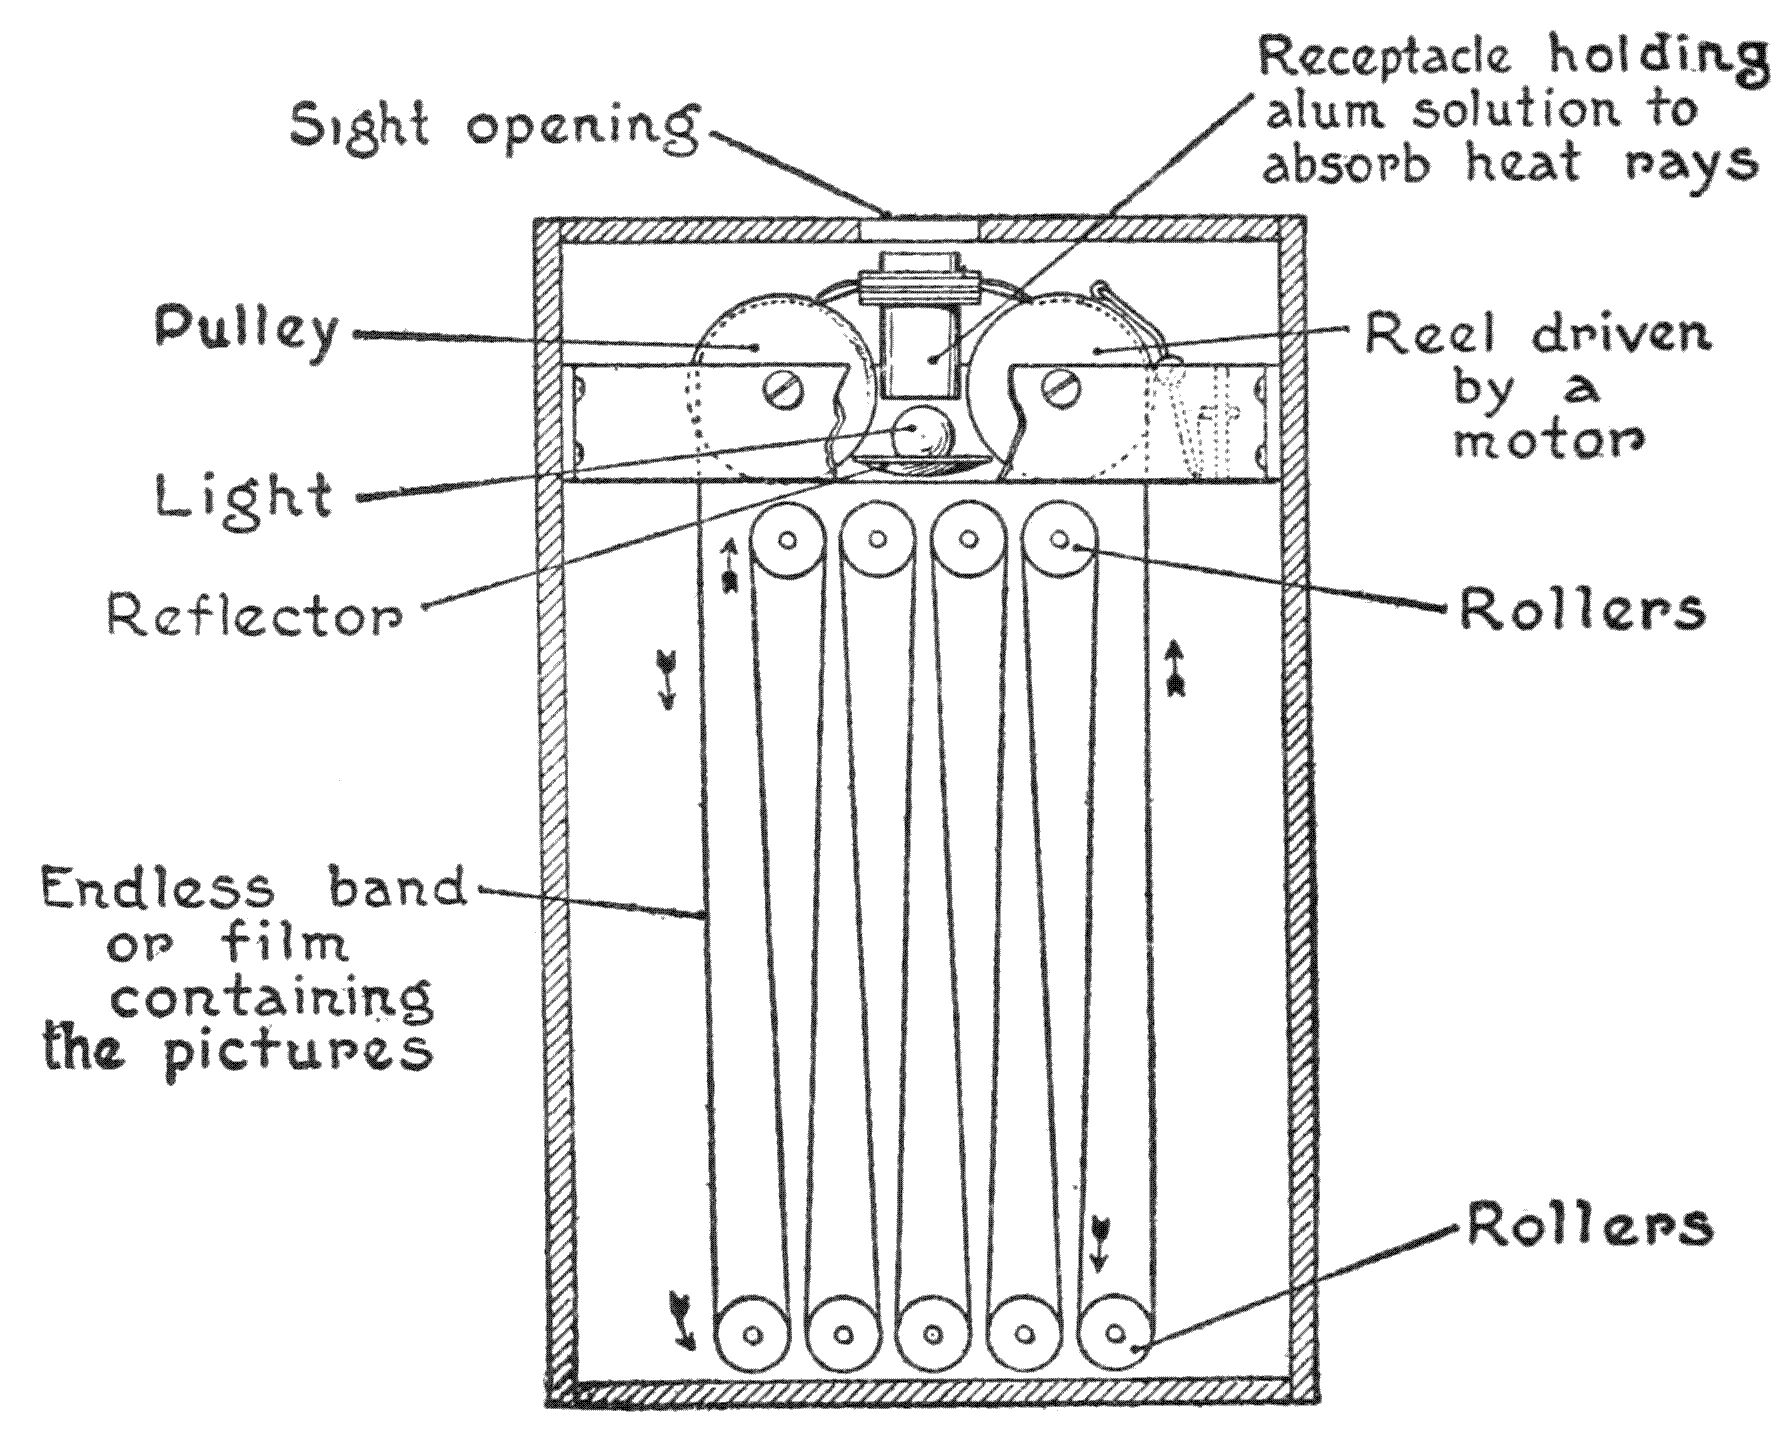 Sight Opening; Receptacle holding alum solution; Reel driven by a motor; Rollers; Endless band of film containing the pictures; Reflector; Light; Pully